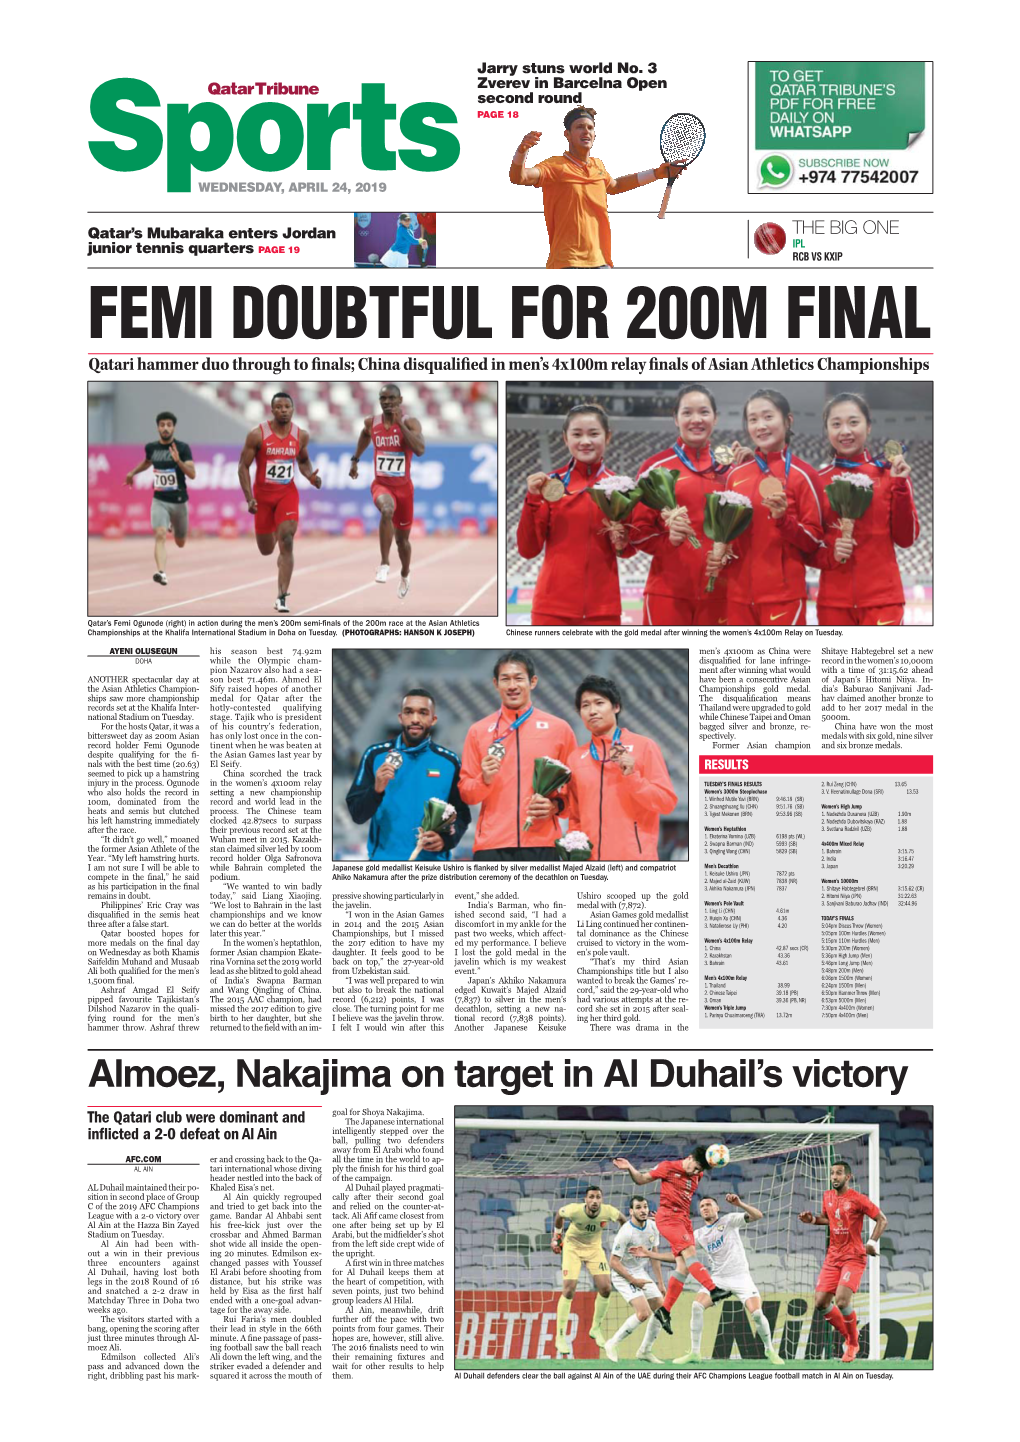 FEMI DOUBTFUL for 200M FINAL Qatari Hammer Duo Through to Finals; China Disqualified in Men’S 4X100m Relay Finals of Asian Athletics Championships